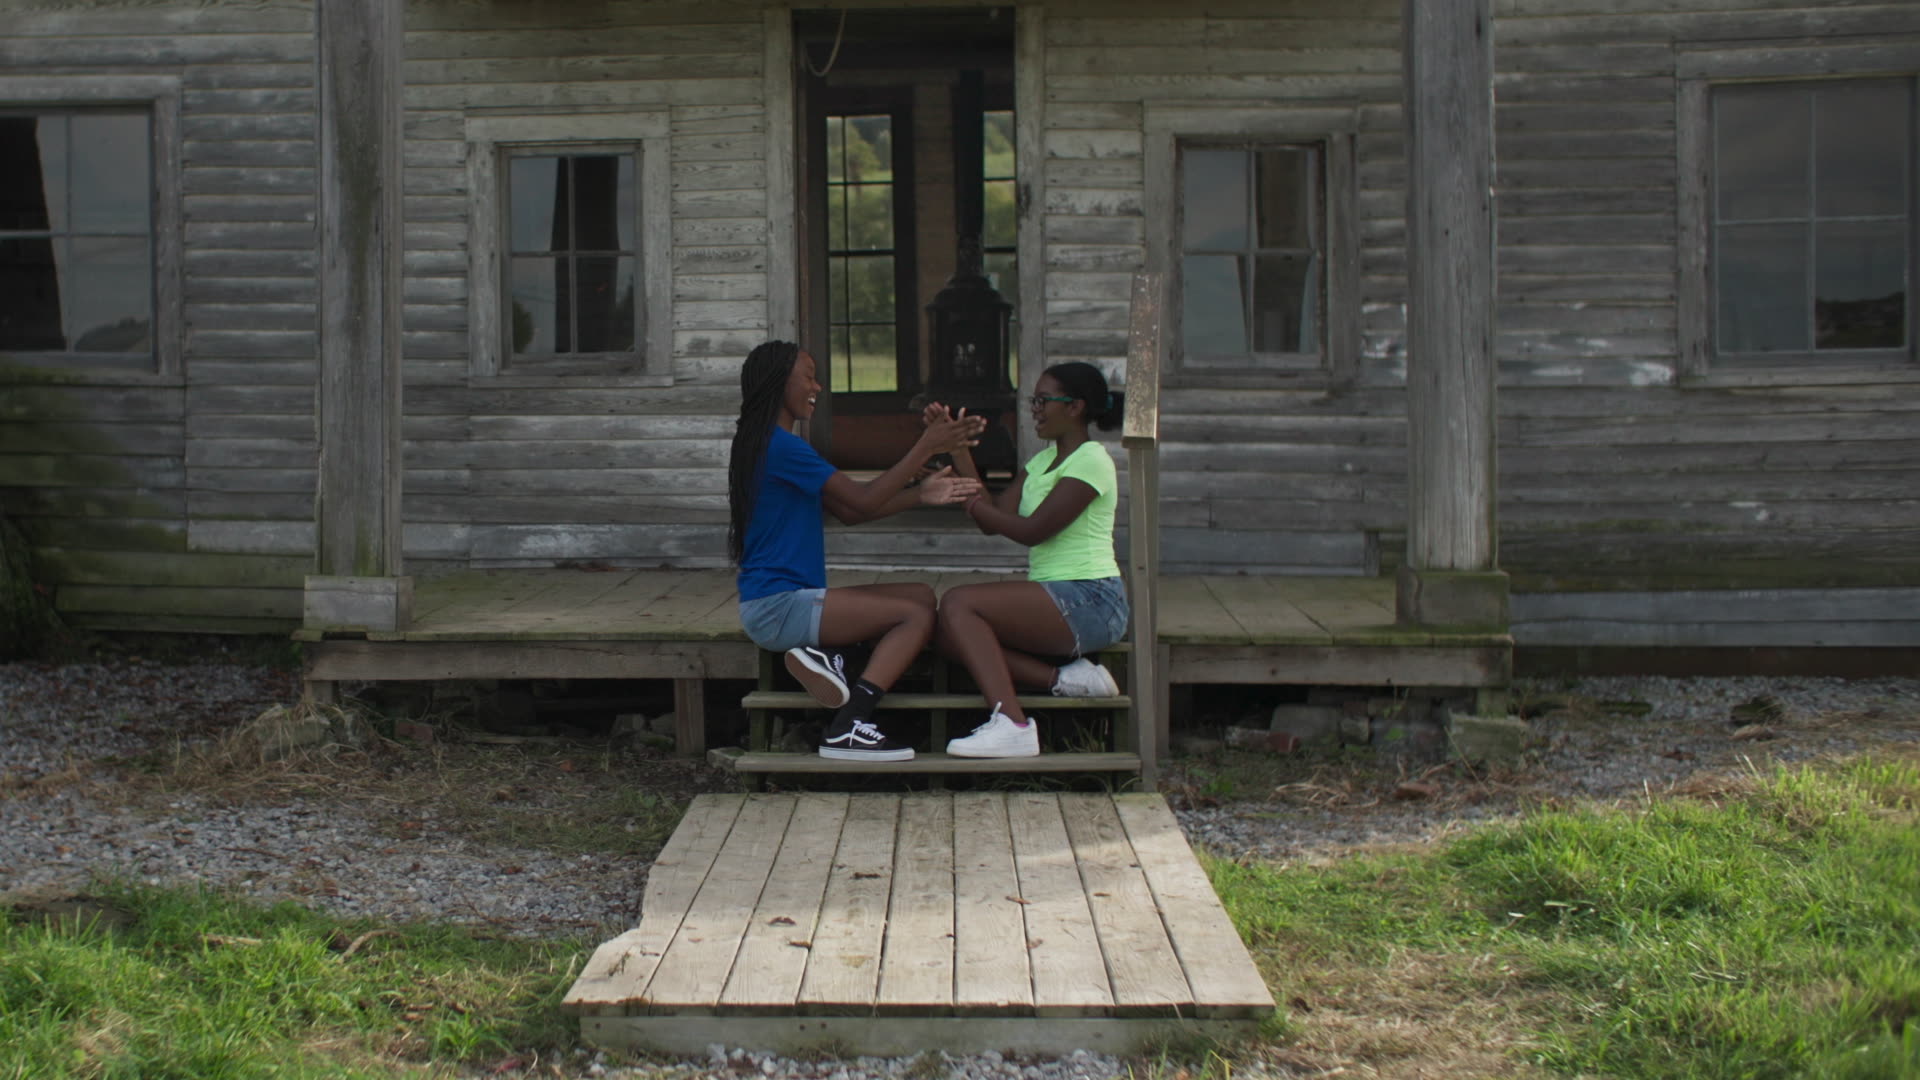 Two young black girls sit profile on a porch playing hand games with each other